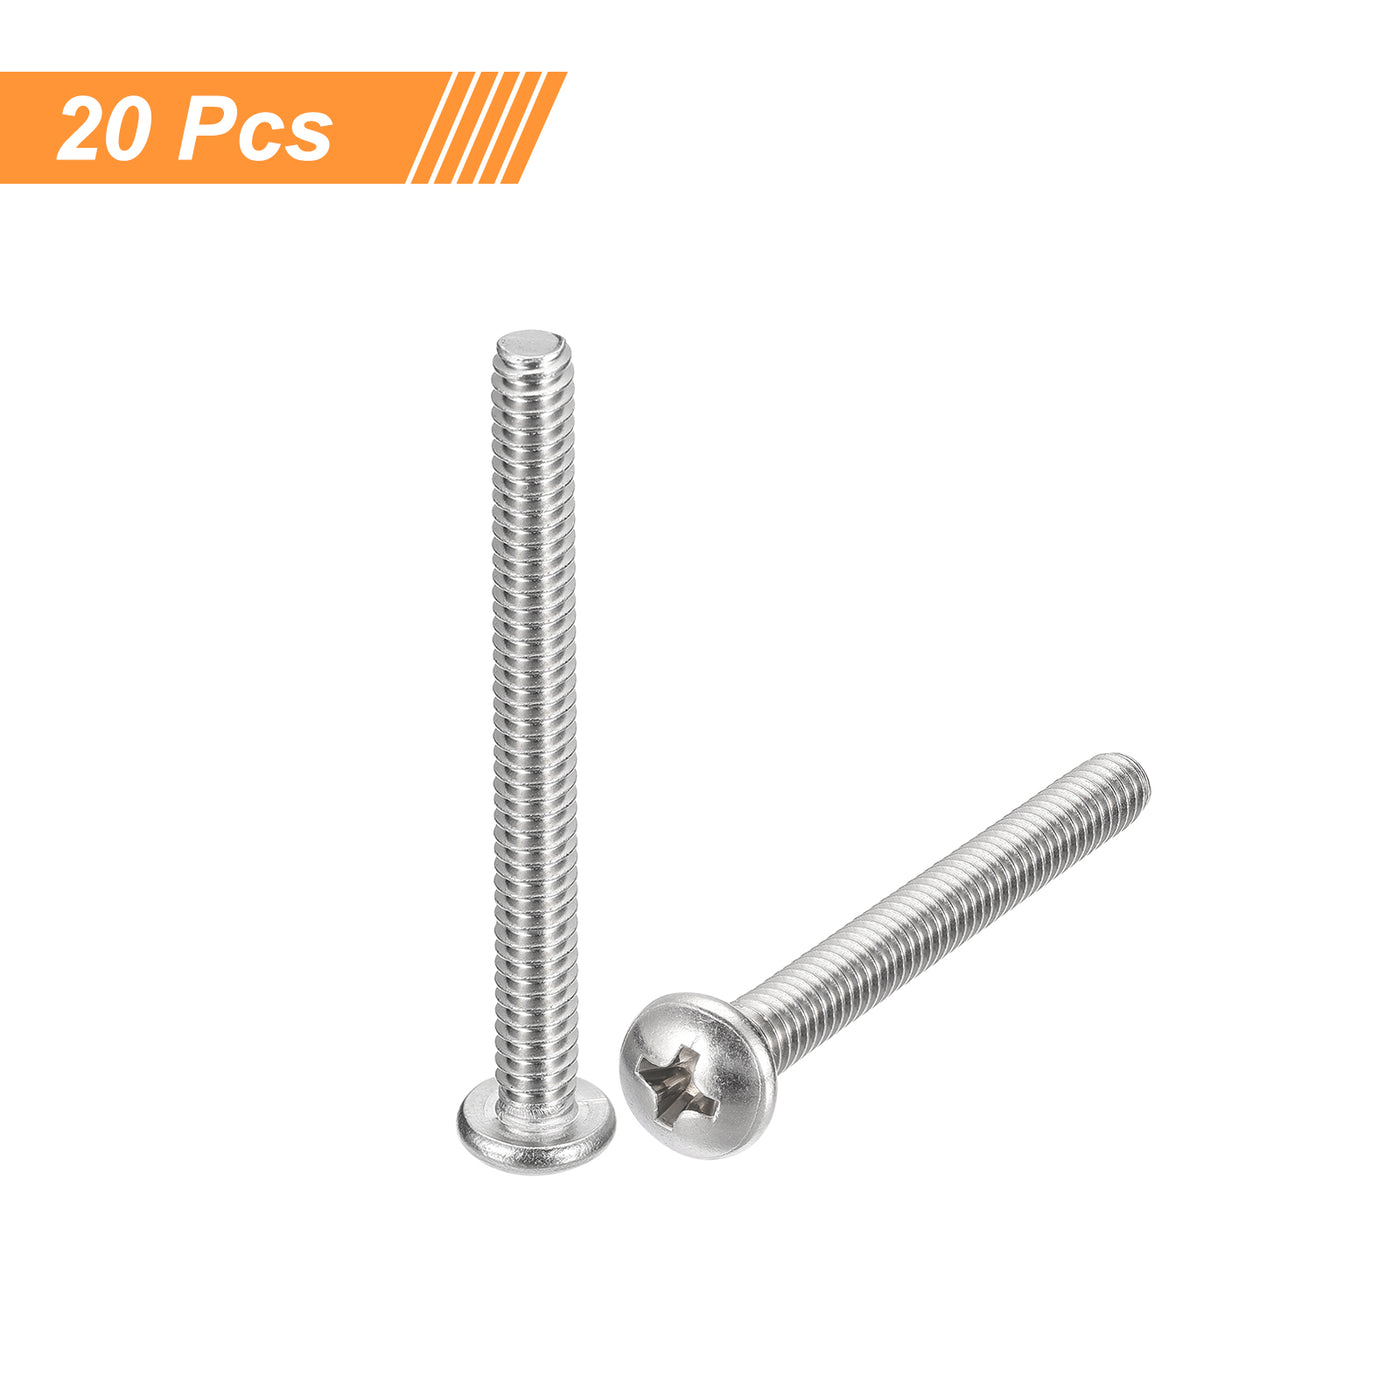 uxcell Uxcell #10-24x2" Pan Head Machine Screws, Stainless Steel 18-8 Screw, Pack of 20